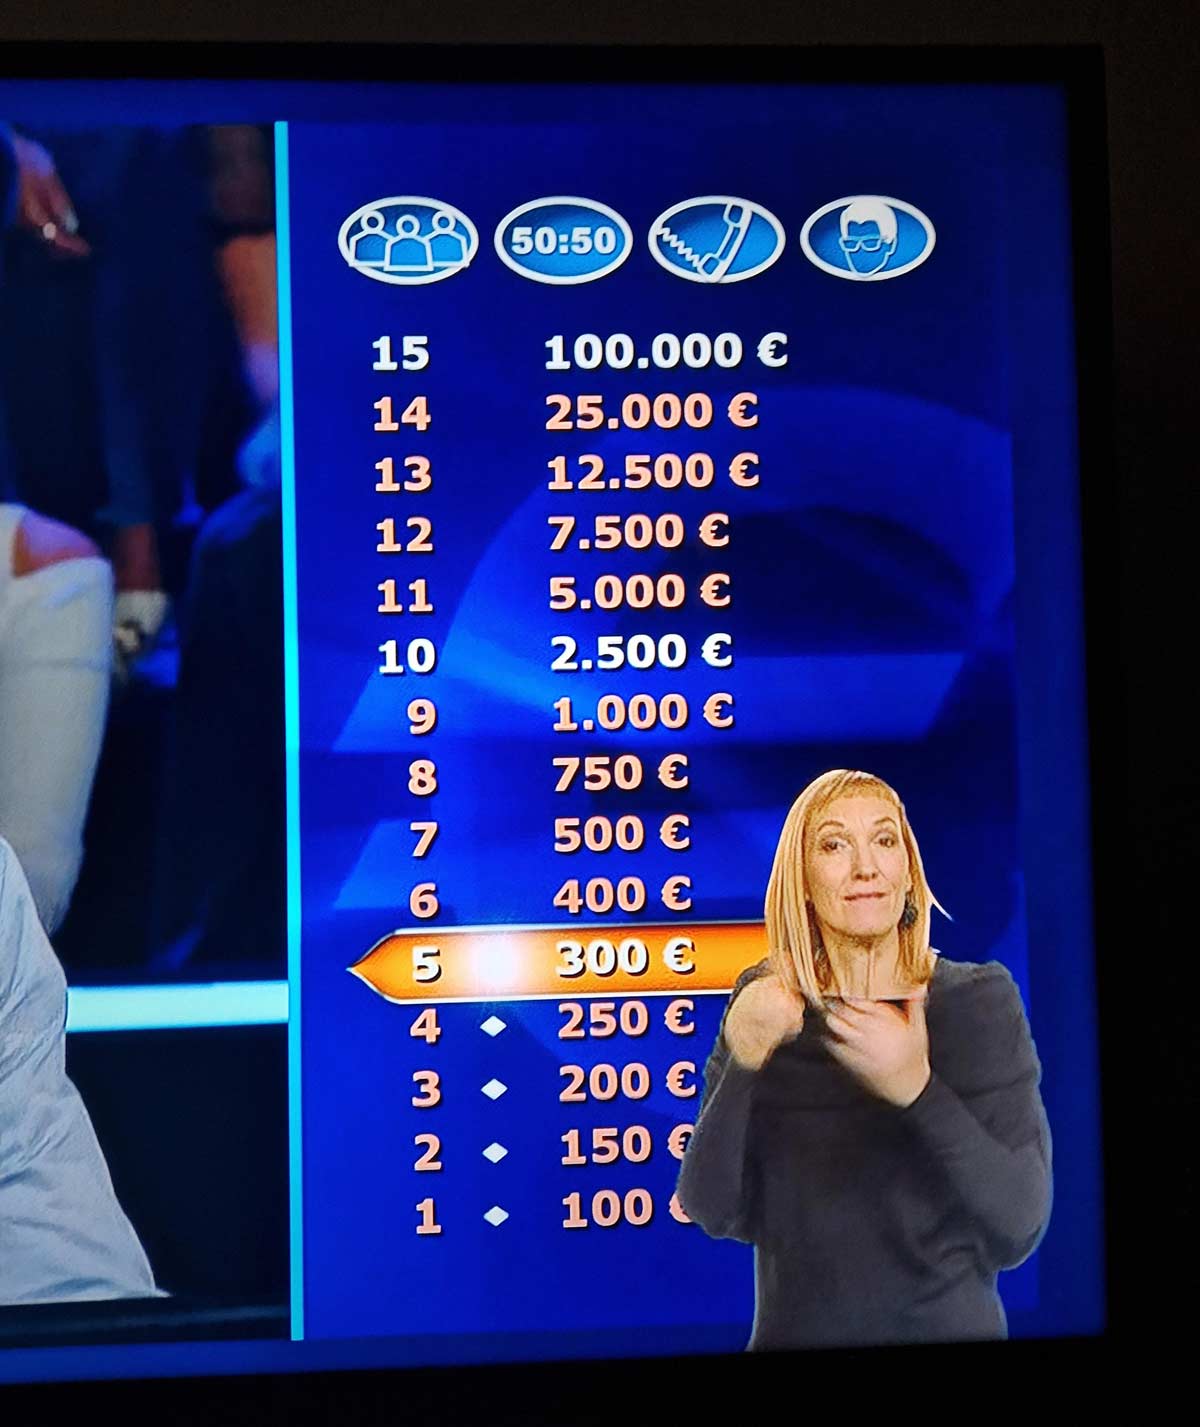 Our Slovenian "Who wants to be a millionaire?" TV show has only a 100,000€ winning award